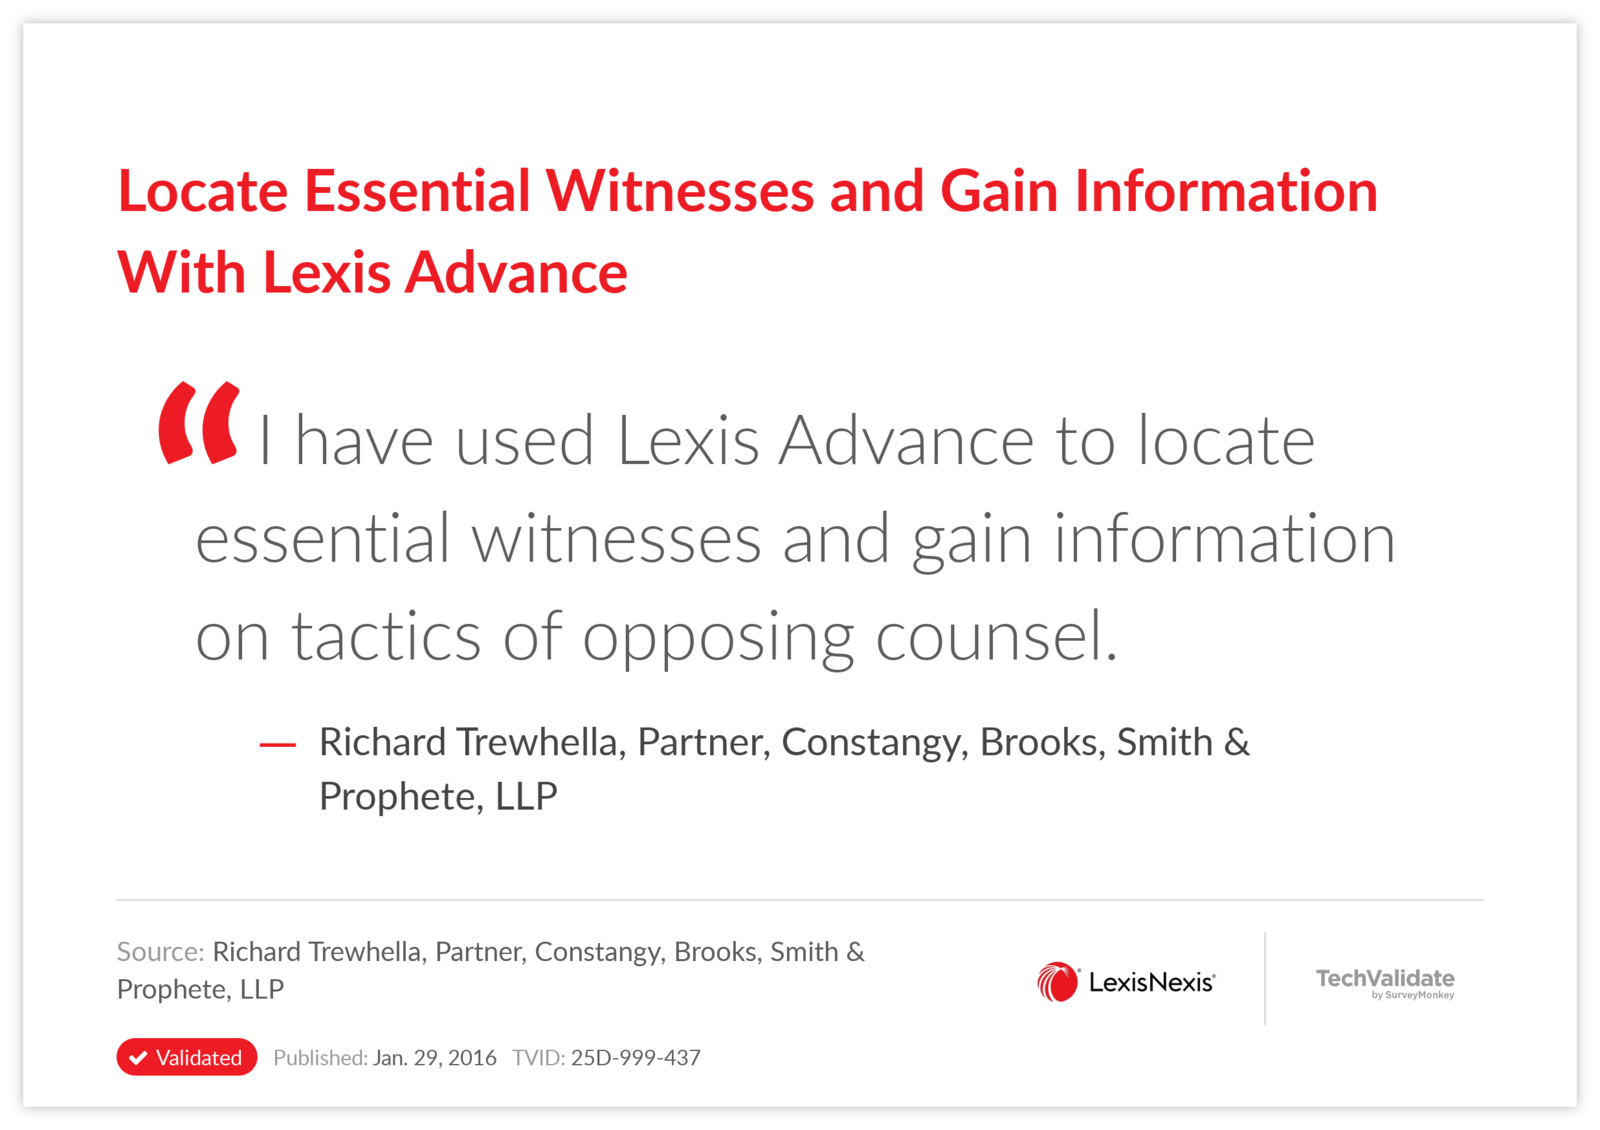 Locate Essential Witnesses and Gain Information With Lexis Advance